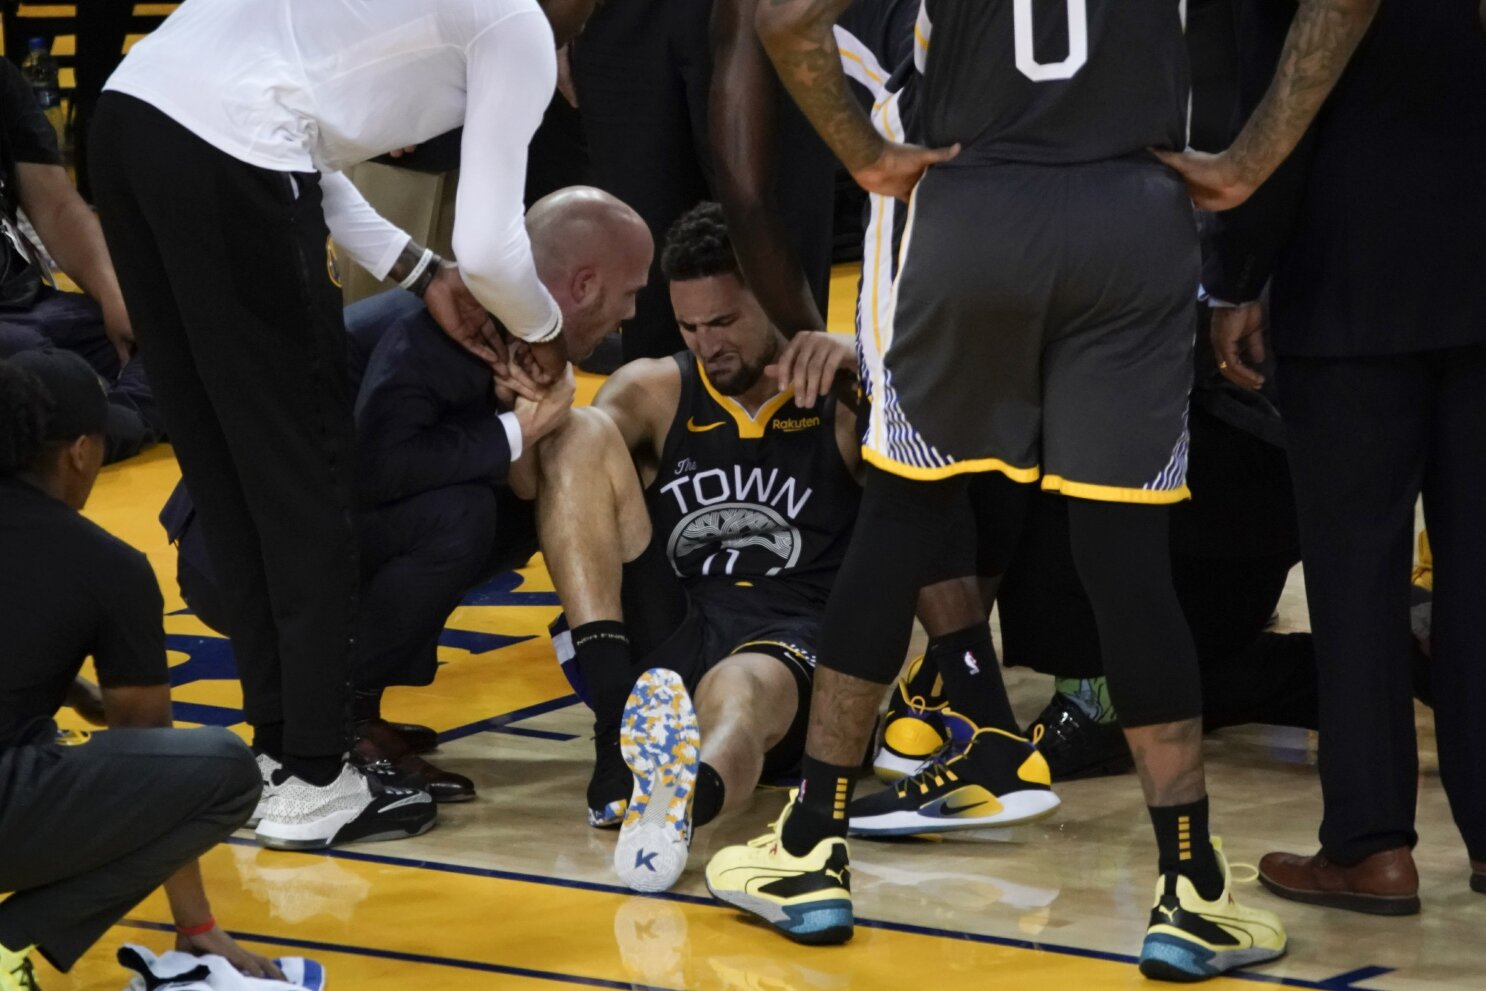 Klay Thompson shares why he stayed on the floor after tearing his ACL in  the NBA Finals - Basketball Network - Your daily dose of basketball